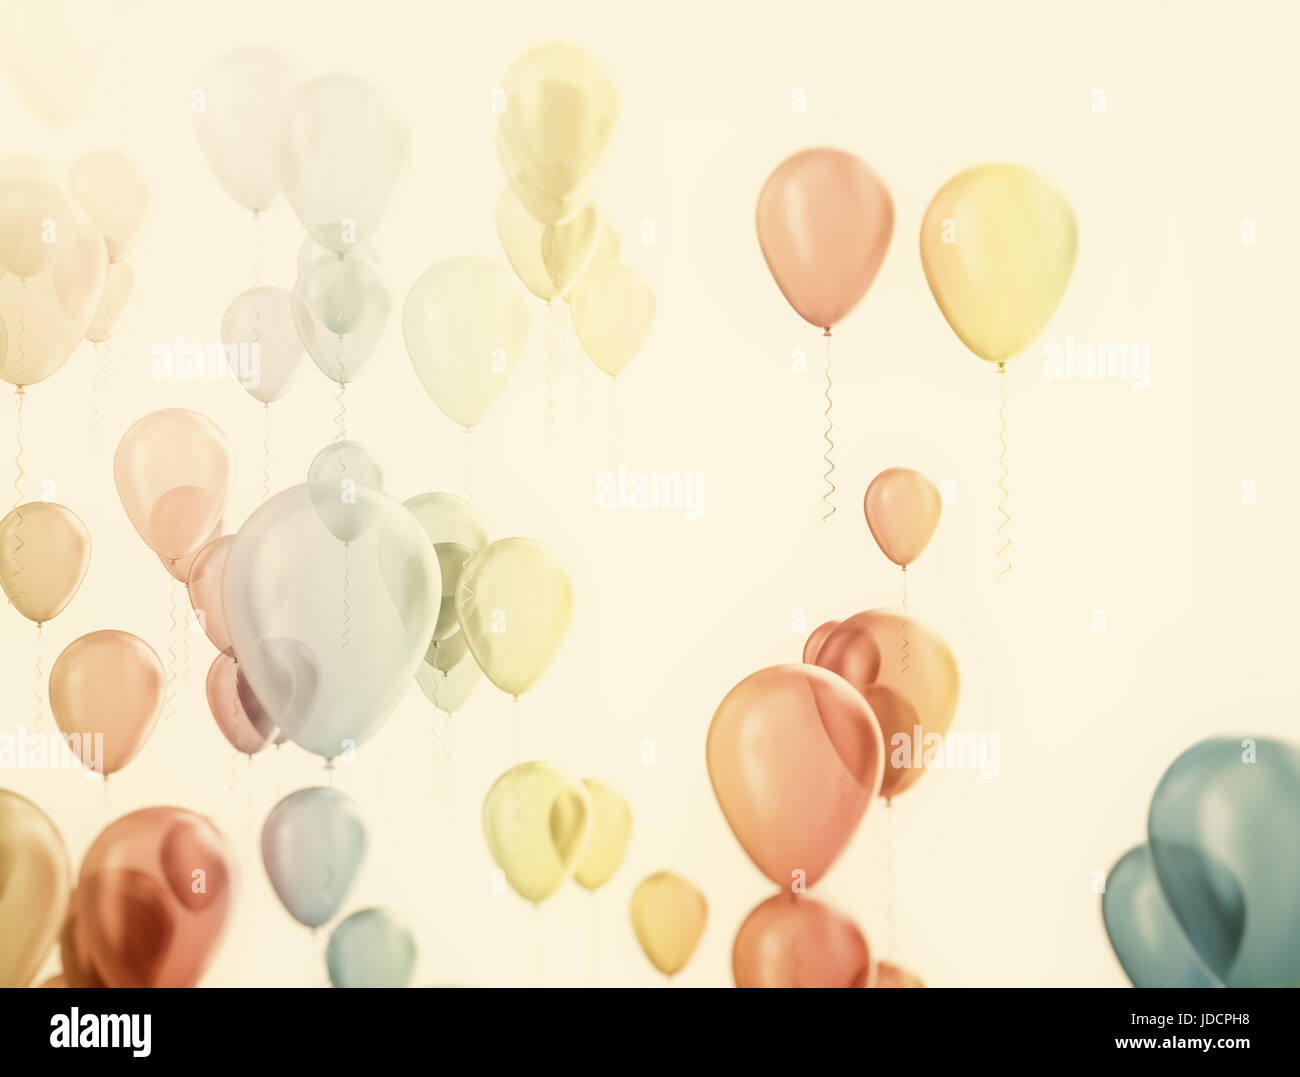 Multi color pastel color party balloons isolated on white Stock Photo